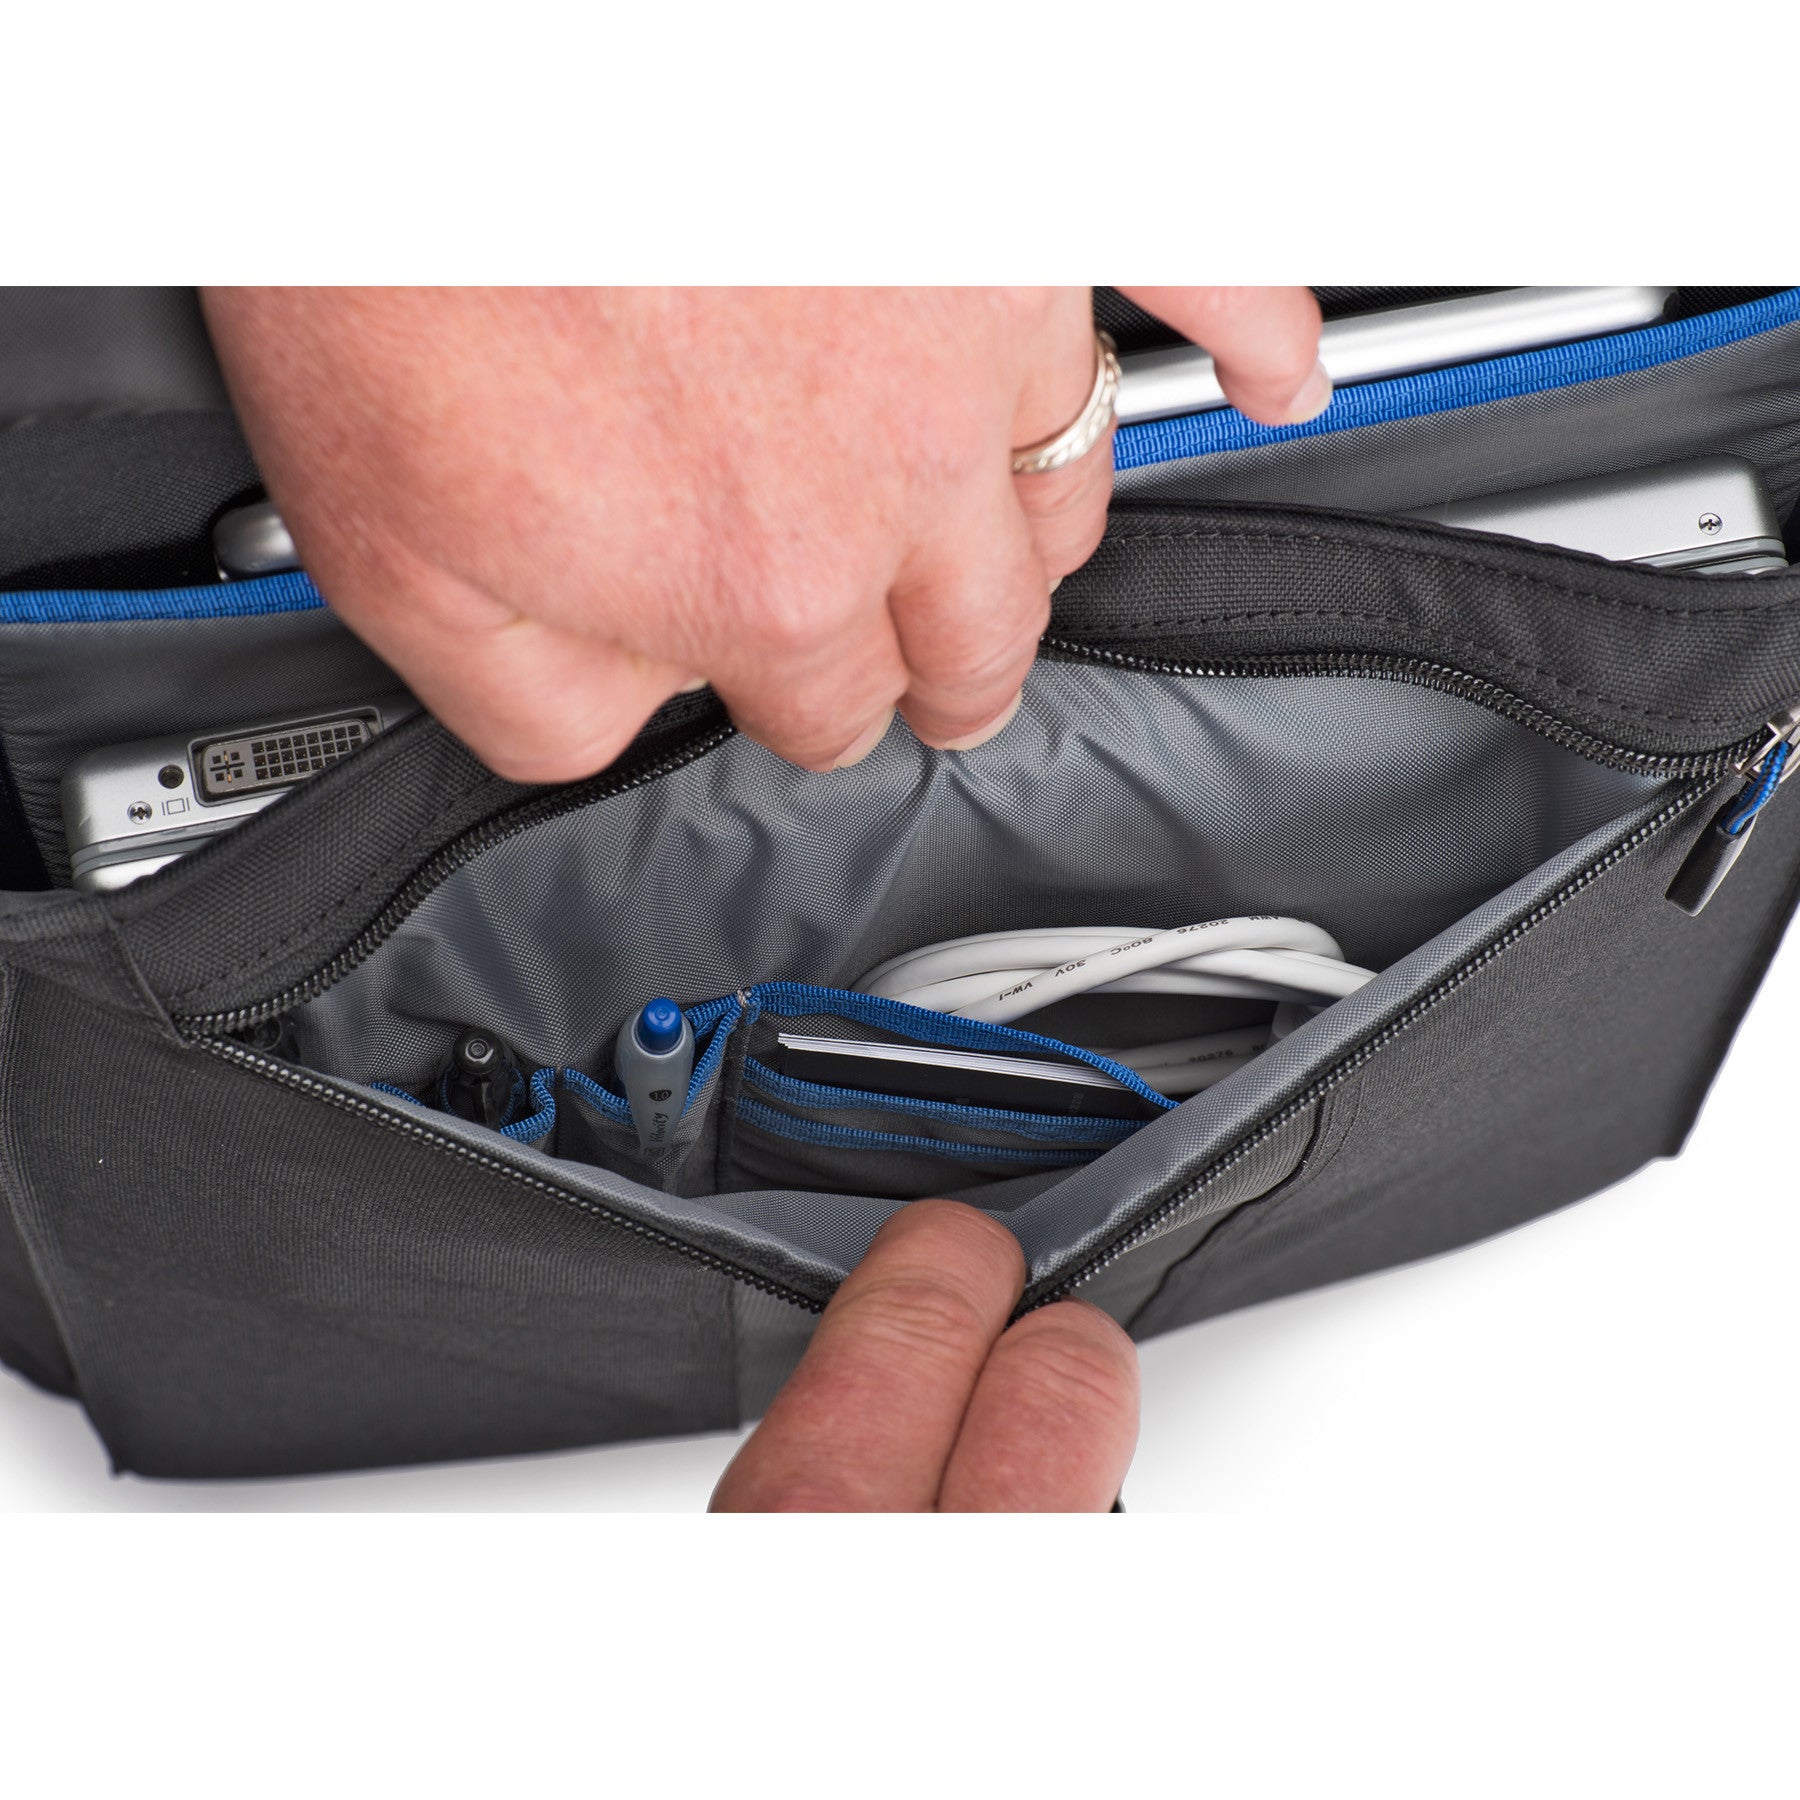 Zippered organizer pocket on front of laptop compartment